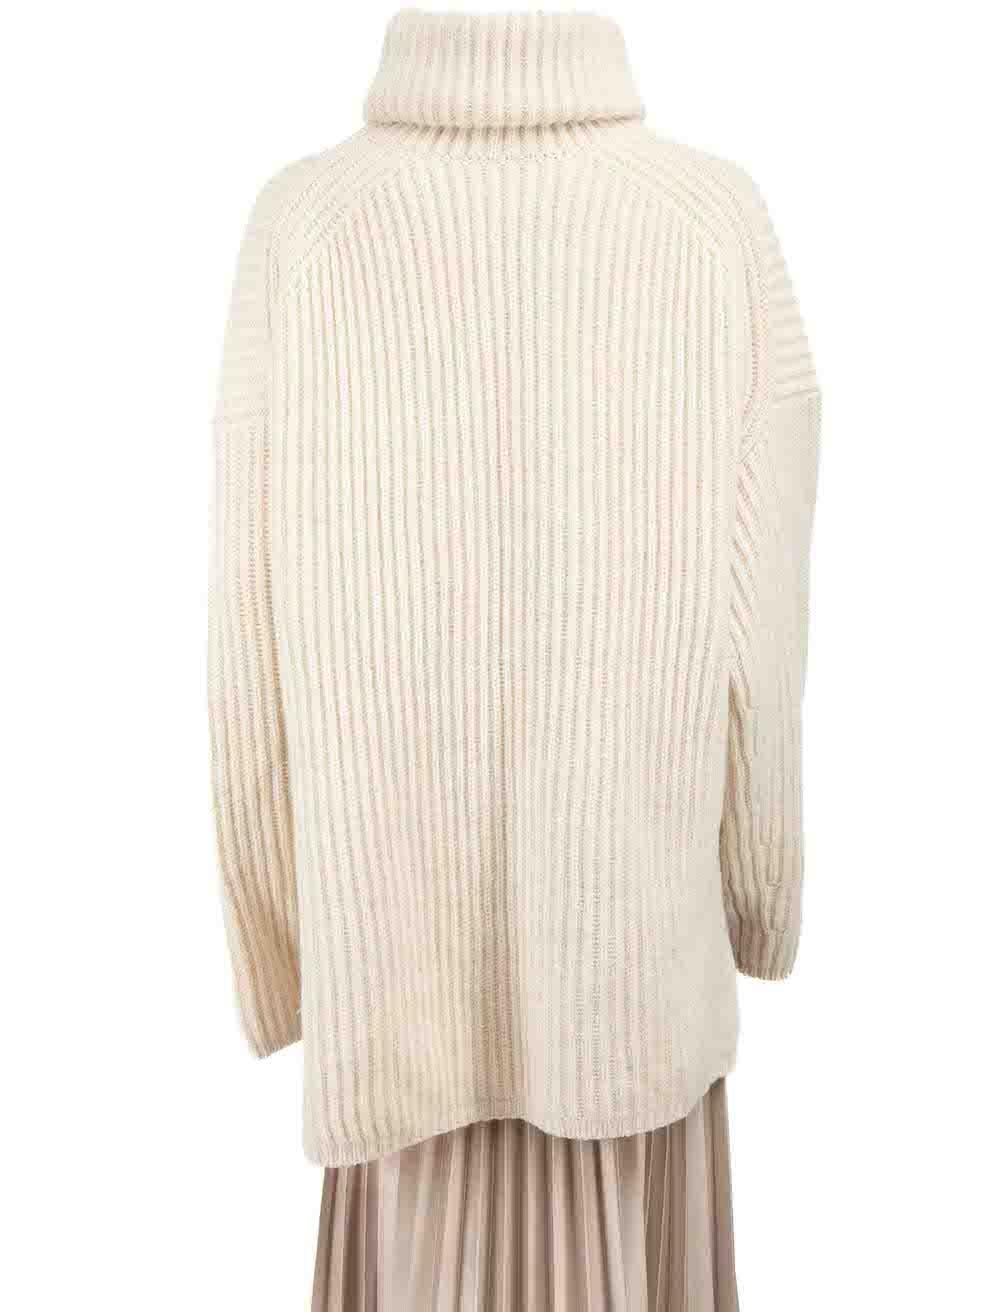 Acne Studios Ecru Wool Knitted Turtleneck Jumper Size M In Good Condition For Sale In London, GB